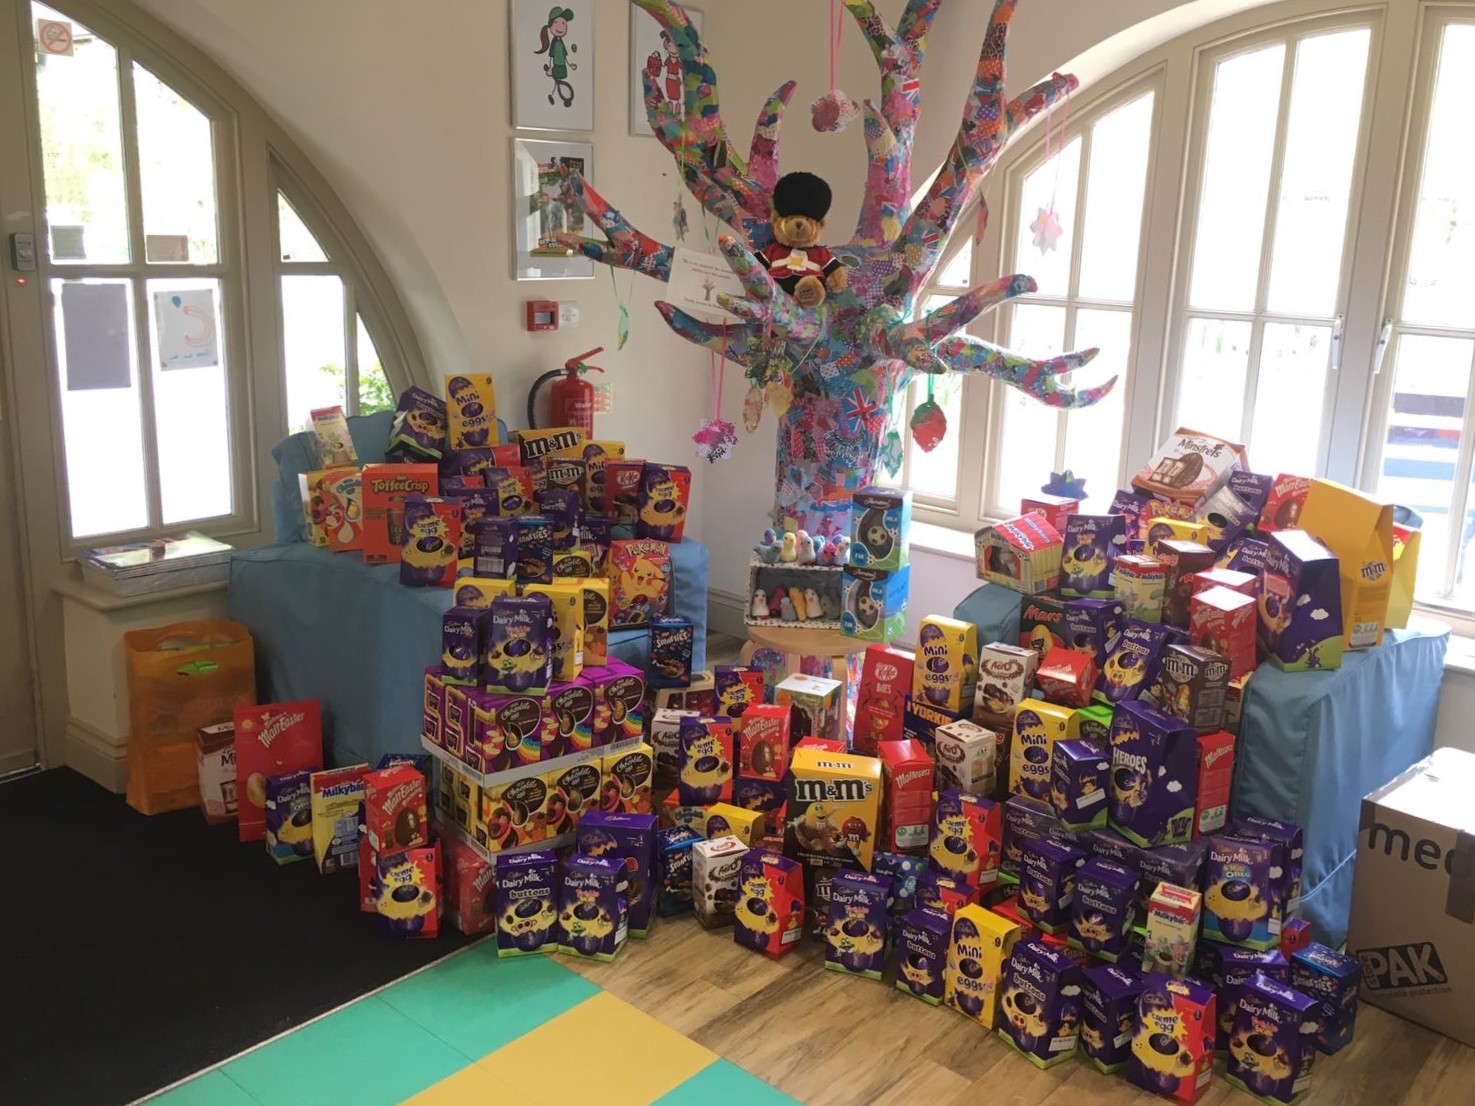 Easter Egg Appeal for Chestnut Tree House – Thank you!